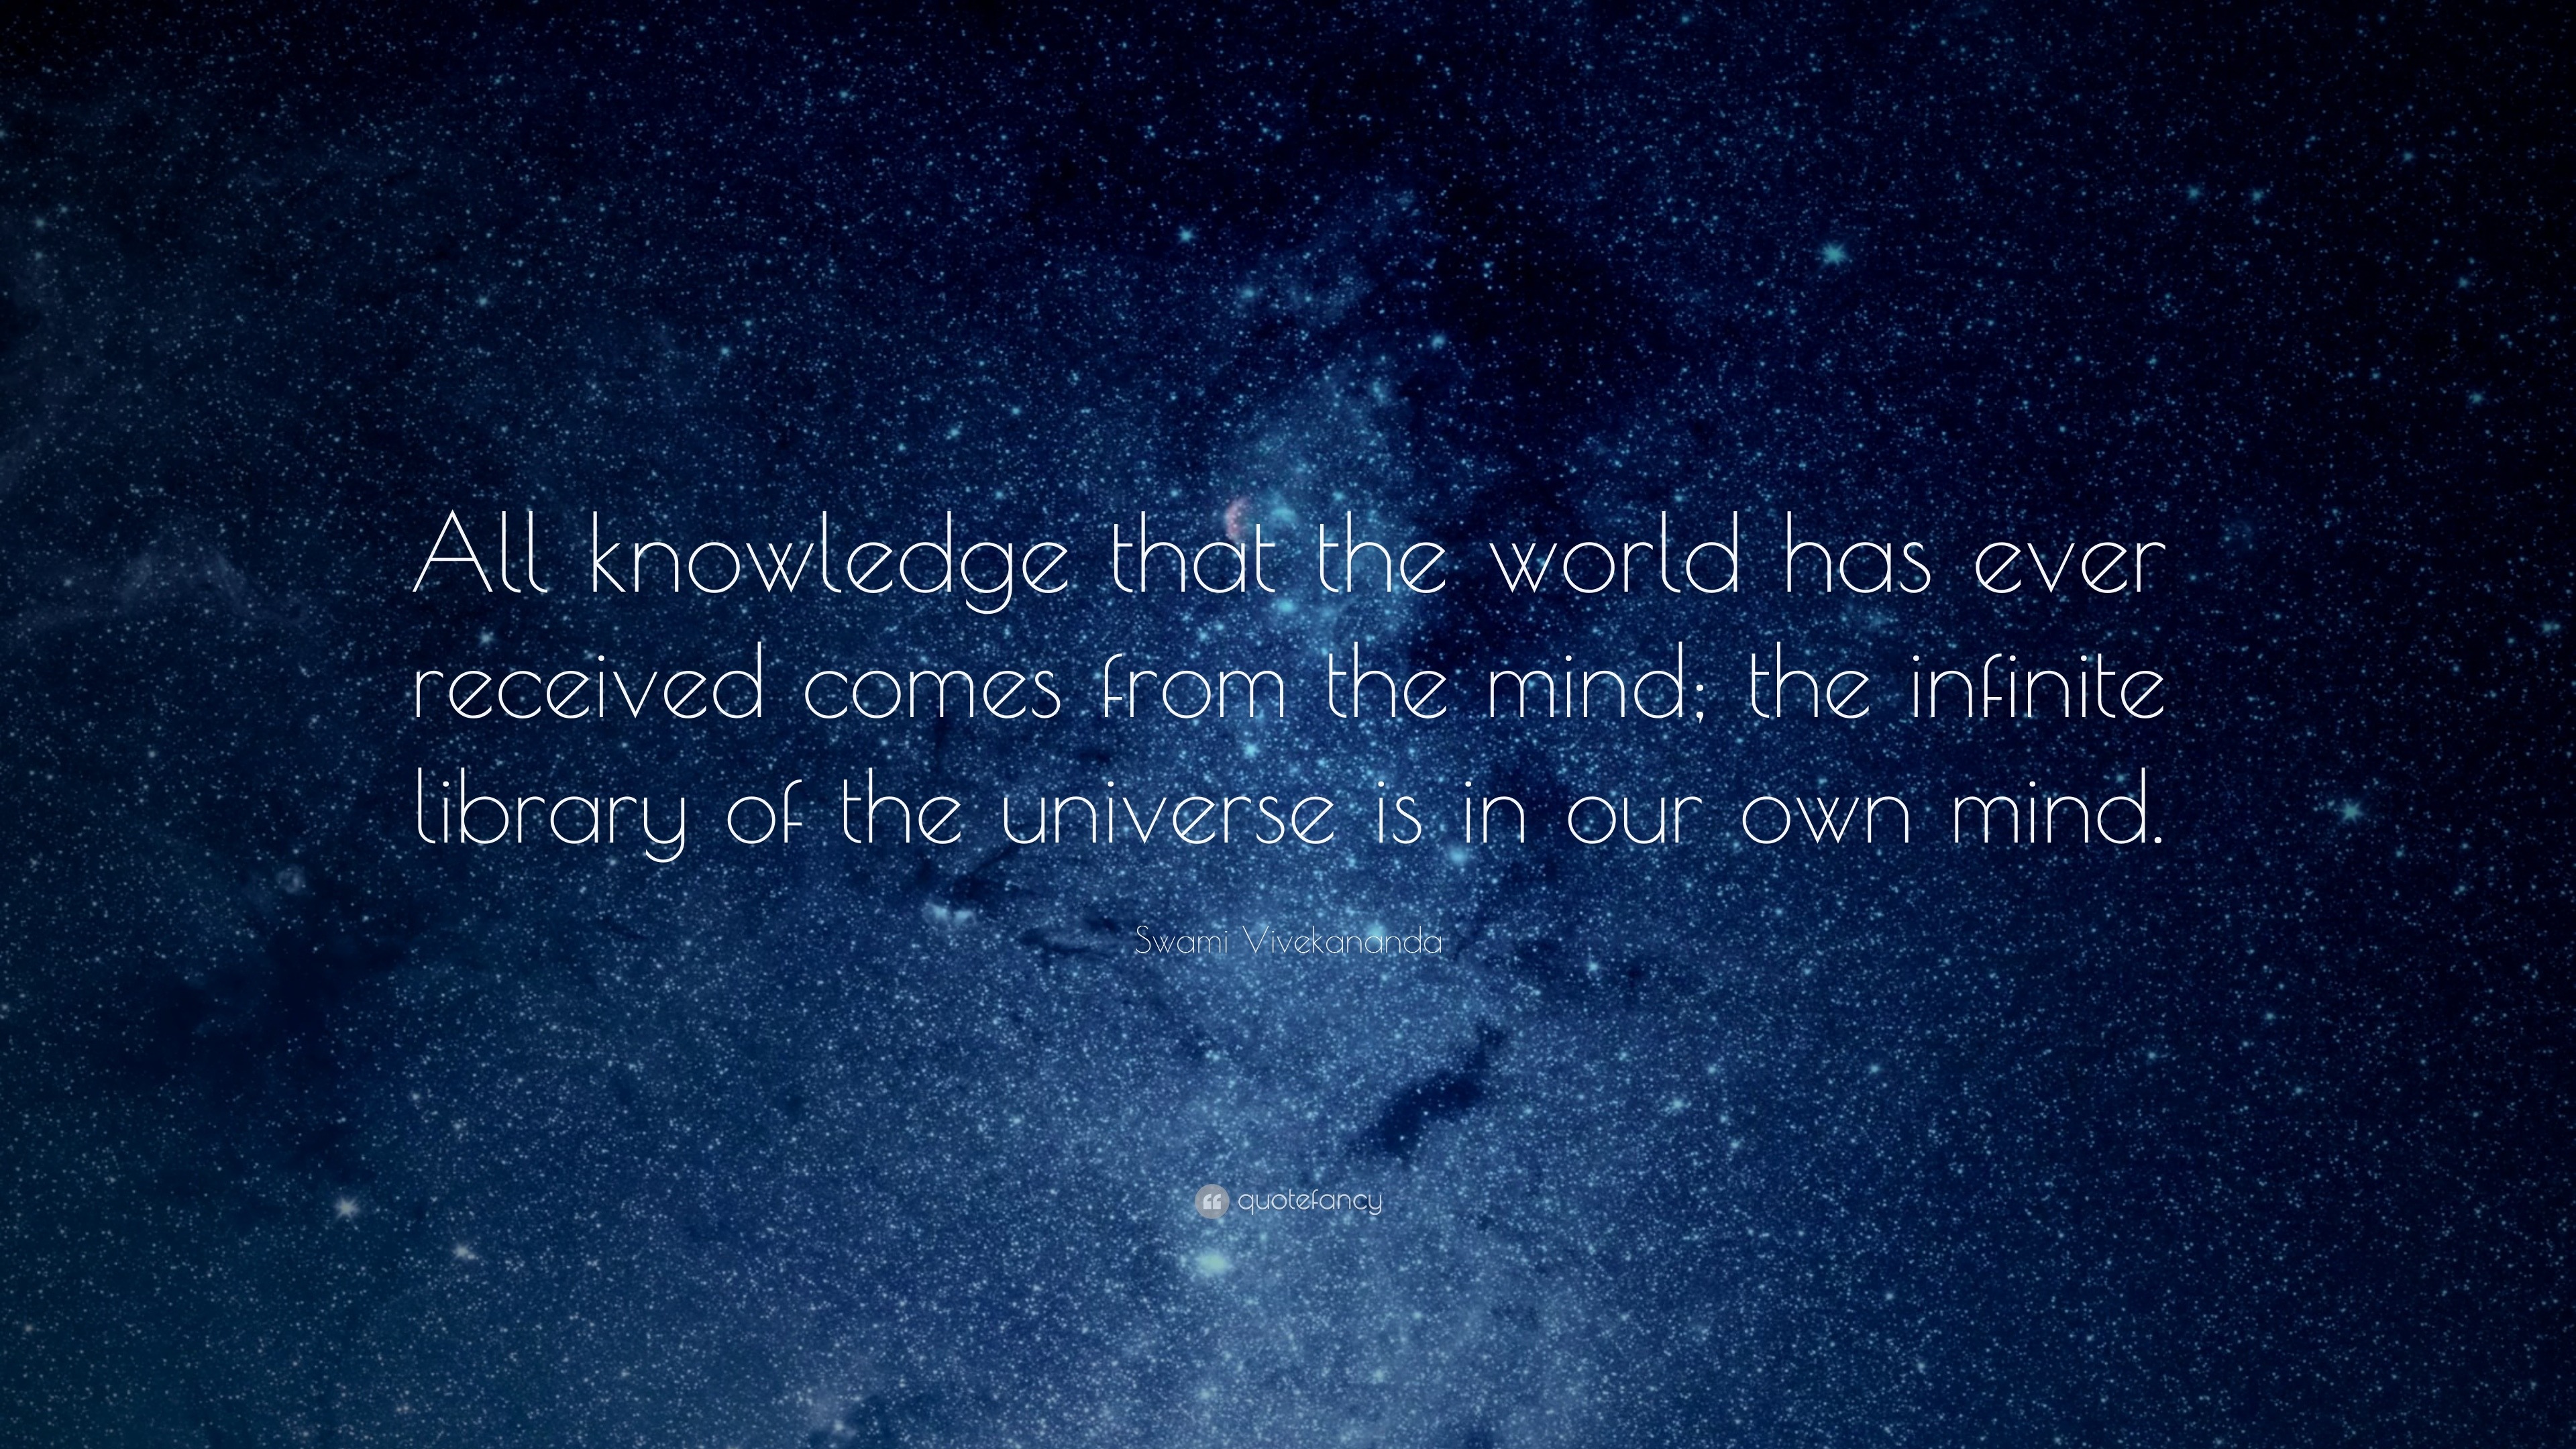 Swami Vivekananda Quote “All knowledge that the world has